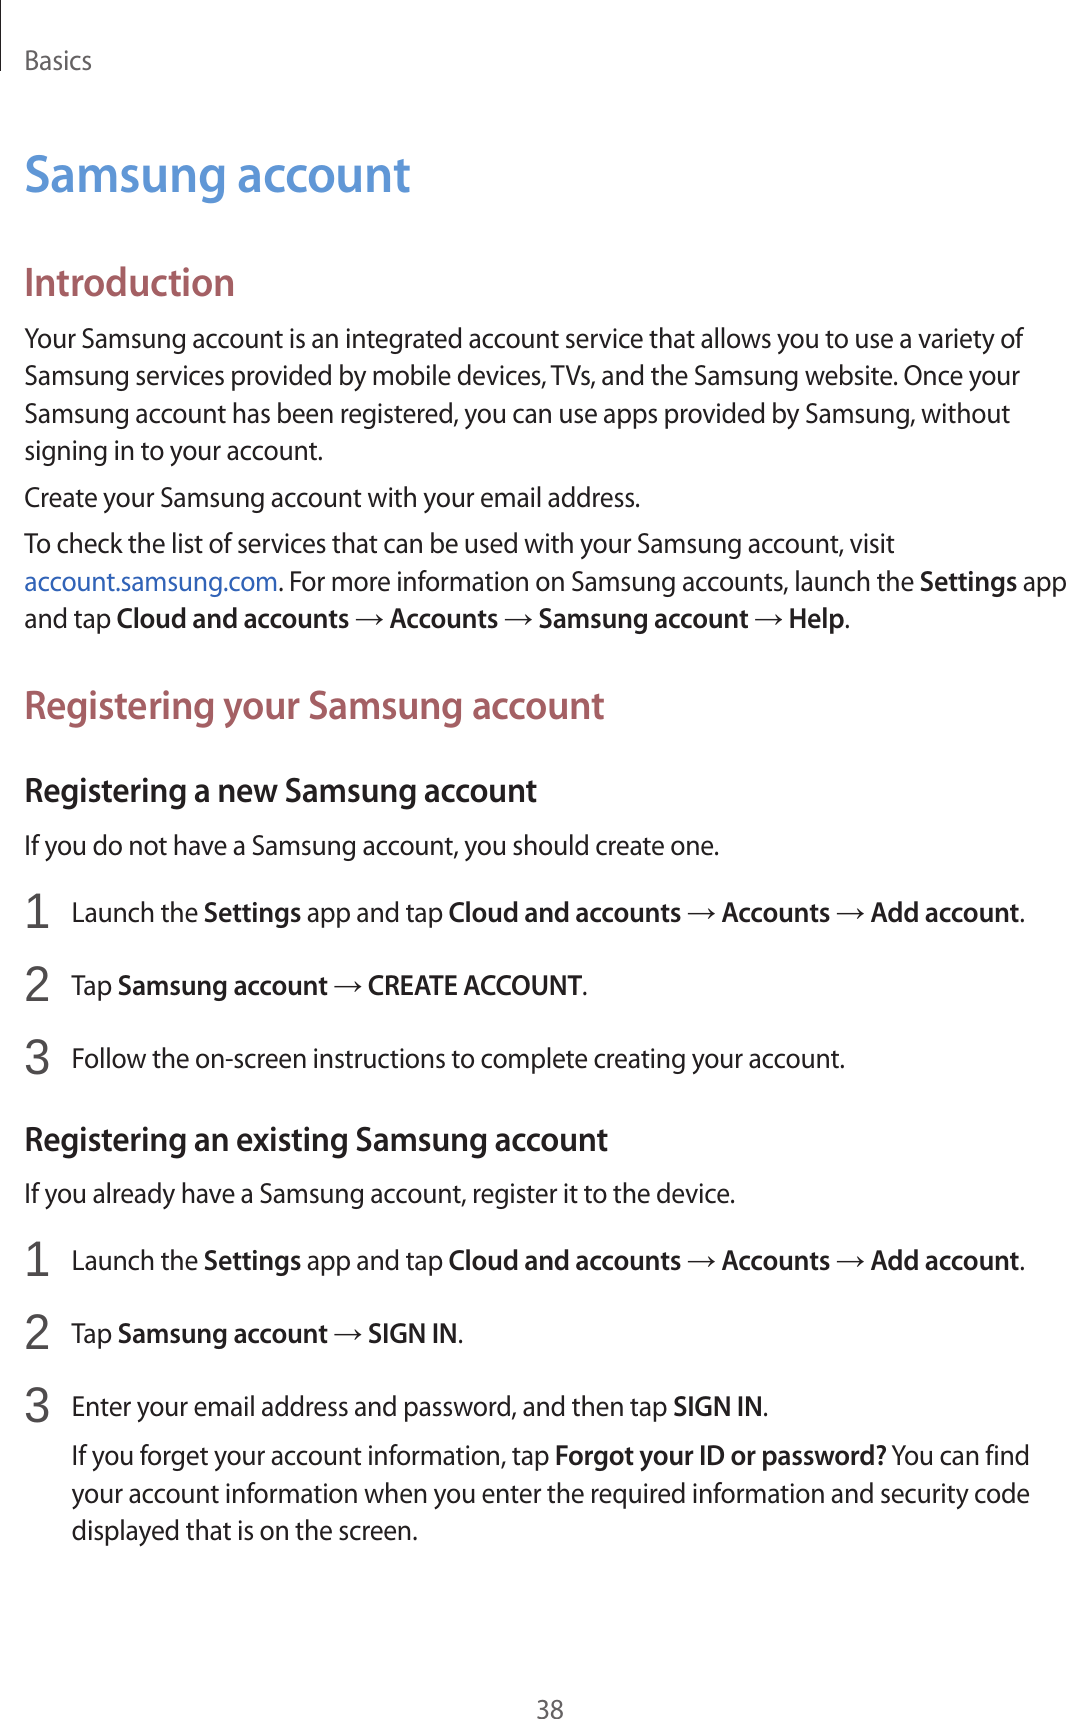 Basics38Samsung accountIntroductionYour Samsung account is an integrated account service that allows you to use a variety of Samsung services provided by mobile devices, TVs, and the Samsung website. Once your Samsung account has been registered, you can use apps provided by Samsung, without signing in to your account.Create your Samsung account with your email address.To check the list of services that can be used with your Samsung account, visit account.samsung.com. For more information on Samsung accounts, launch the Settings app and tap Cloud and accounts → Accounts → Samsung account → Help.Registering your Samsung accountRegistering a new Samsung accountIf you do not have a Samsung account, you should create one.1  Launch the Settings app and tap Cloud and accounts → Accounts → Add account.2  Tap Samsung account → CREATE ACCOUNT.3  Follow the on-screen instructions to complete creating your account.Registering an existing Samsung accountIf you already have a Samsung account, register it to the device.1  Launch the Settings app and tap Cloud and accounts → Accounts → Add account.2  Tap Samsung account → SIGN IN.3  Enter your email address and password, and then tap SIGN IN.If you forget your account information, tap Forgot your ID or password? You can find your account information when you enter the required information and security code displayed that is on the screen.